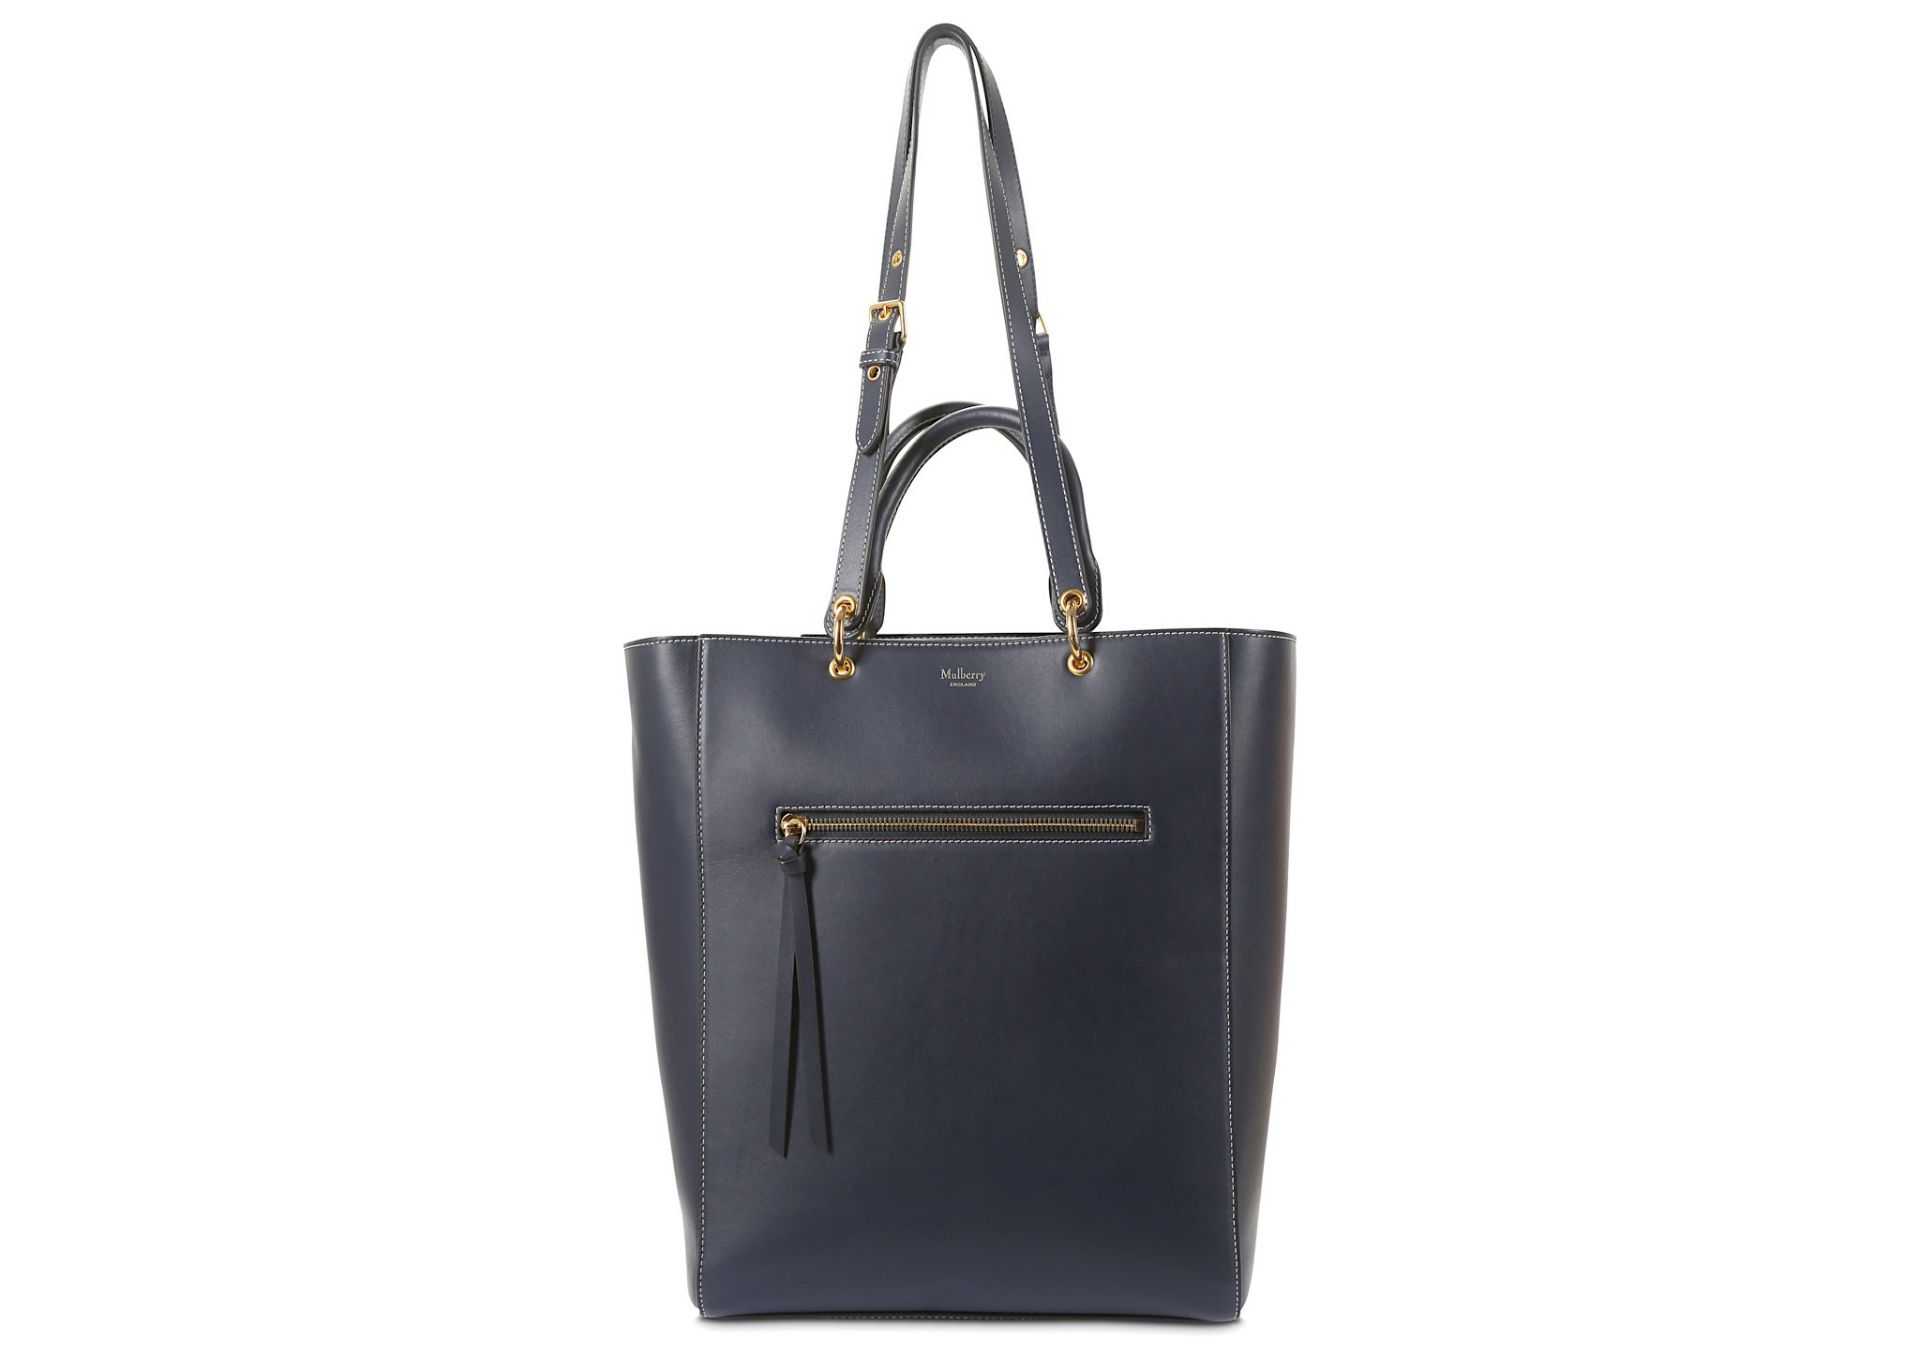 Mulberry Midnight Maple Tote, c. 2016, navy blue c